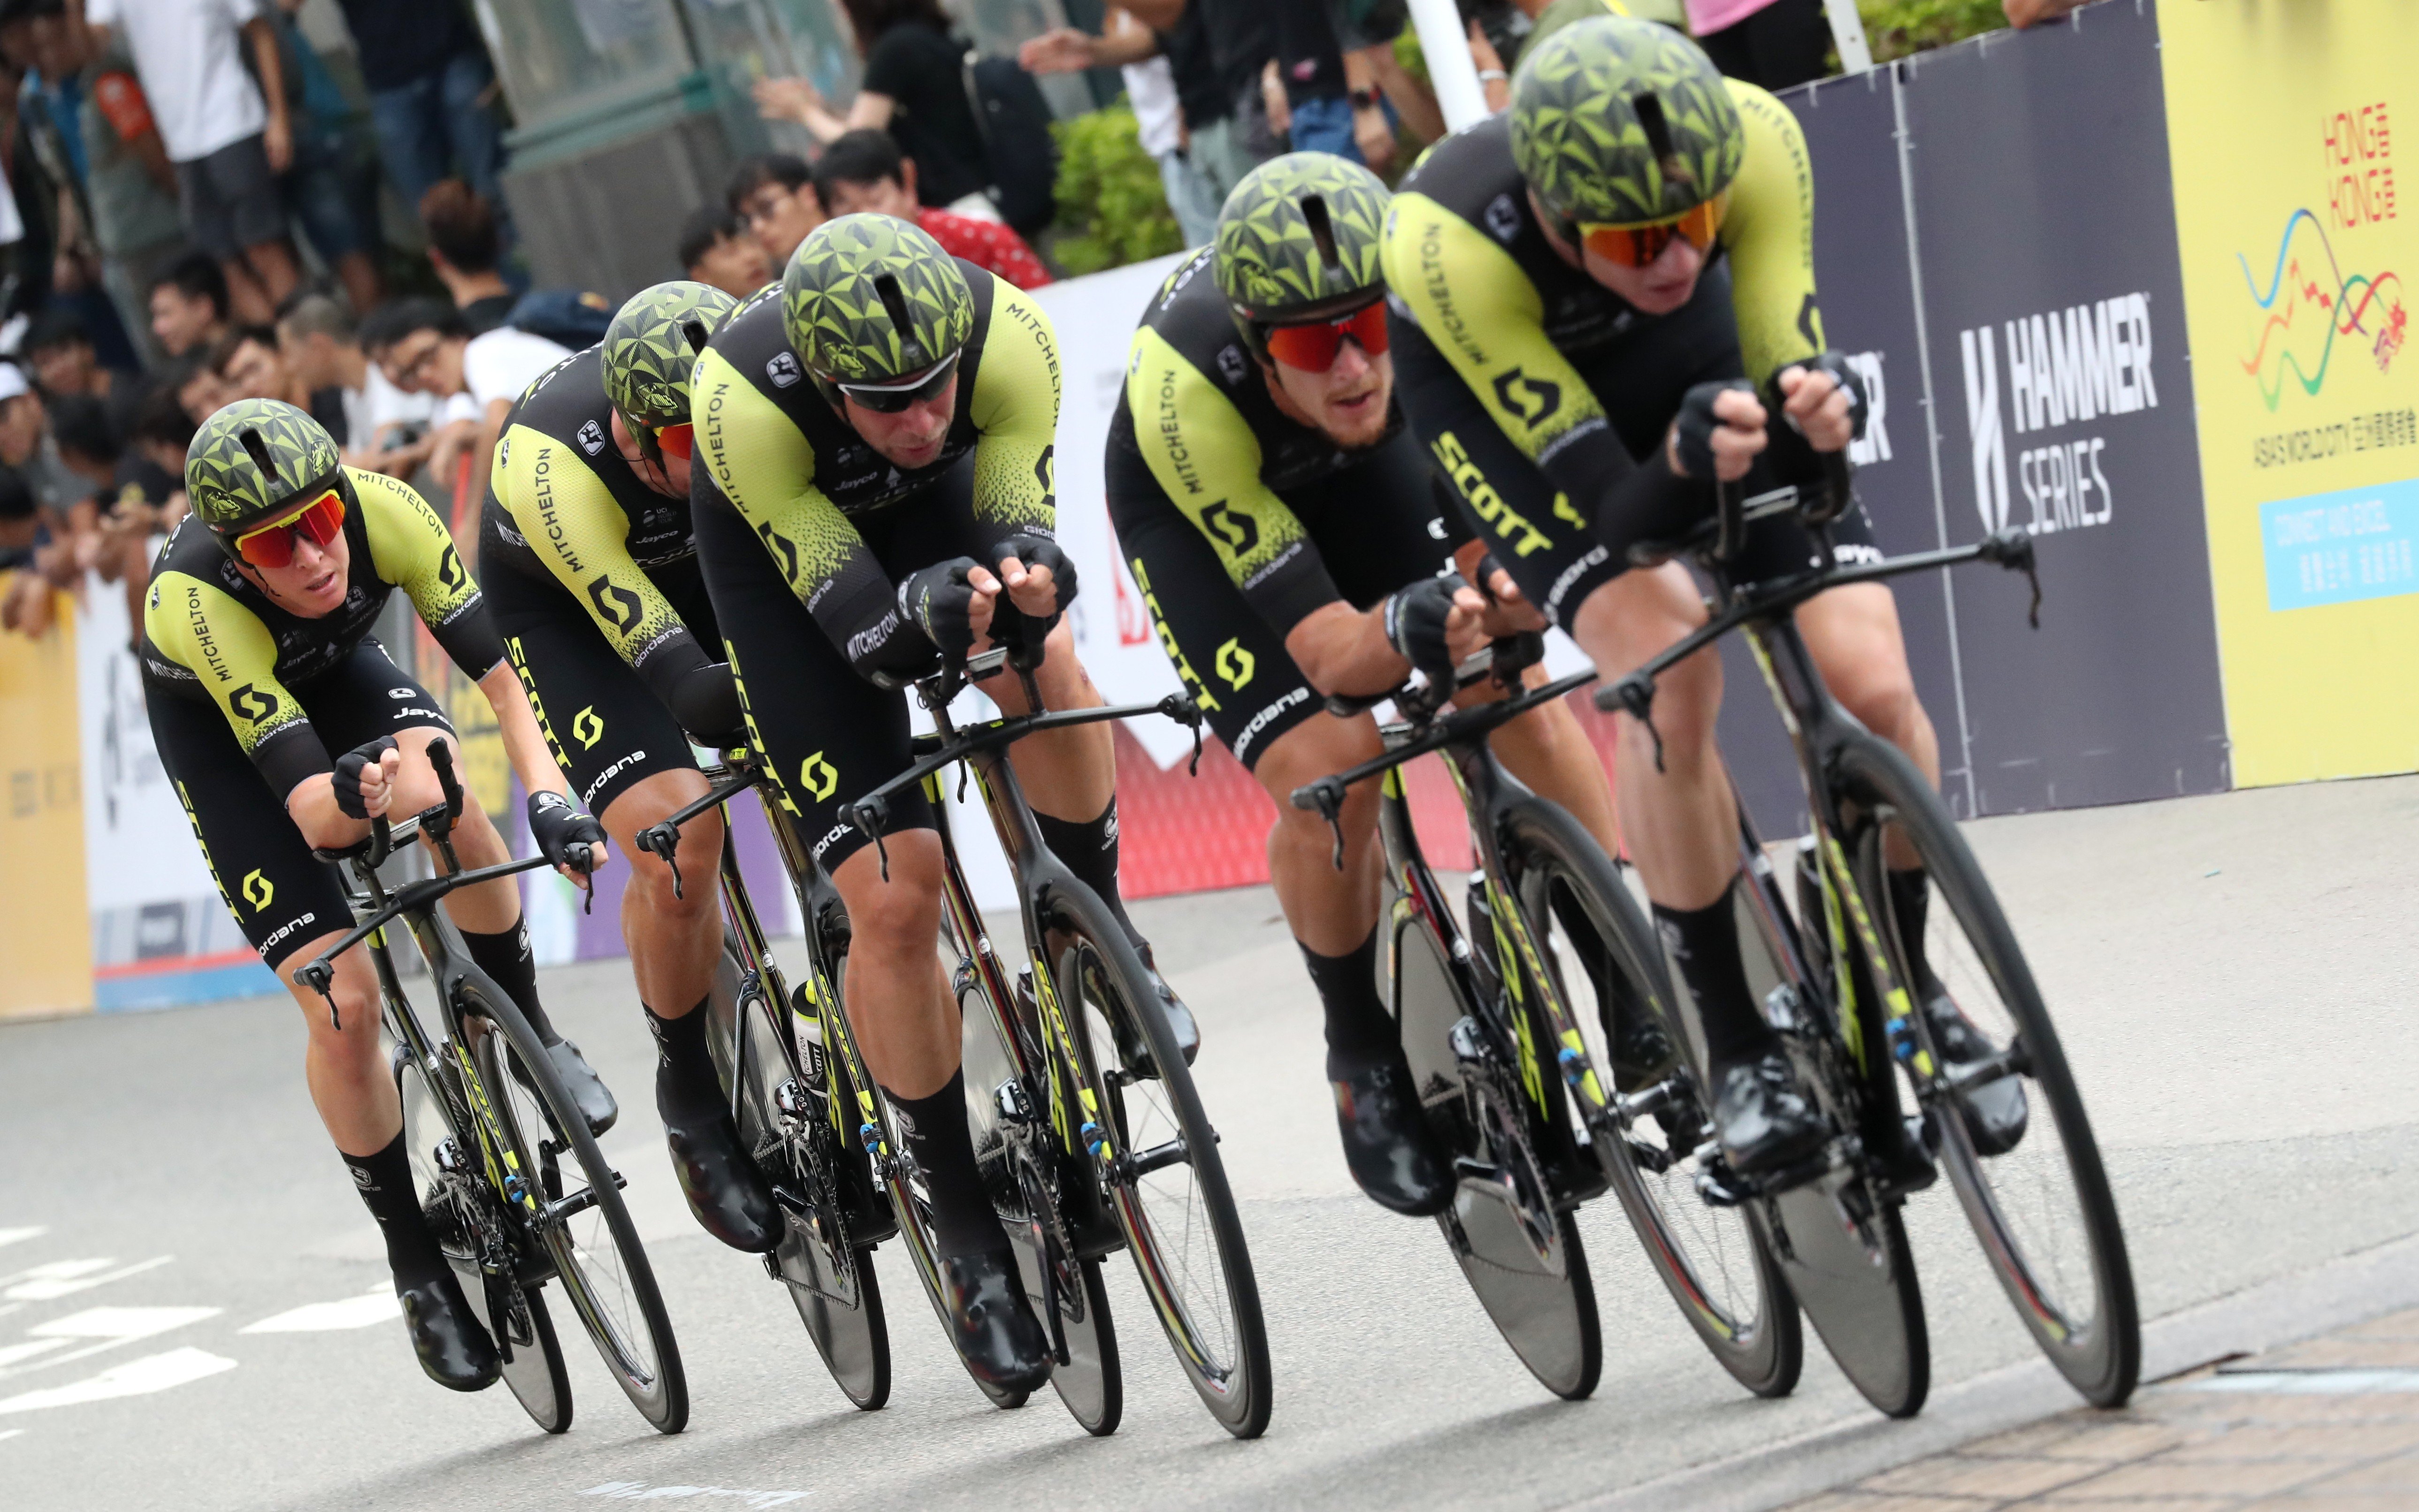 The Hong Kong Cyclothon includes the Hammer series that features some of the world’s best riders. Photo: K.Y. Cheng